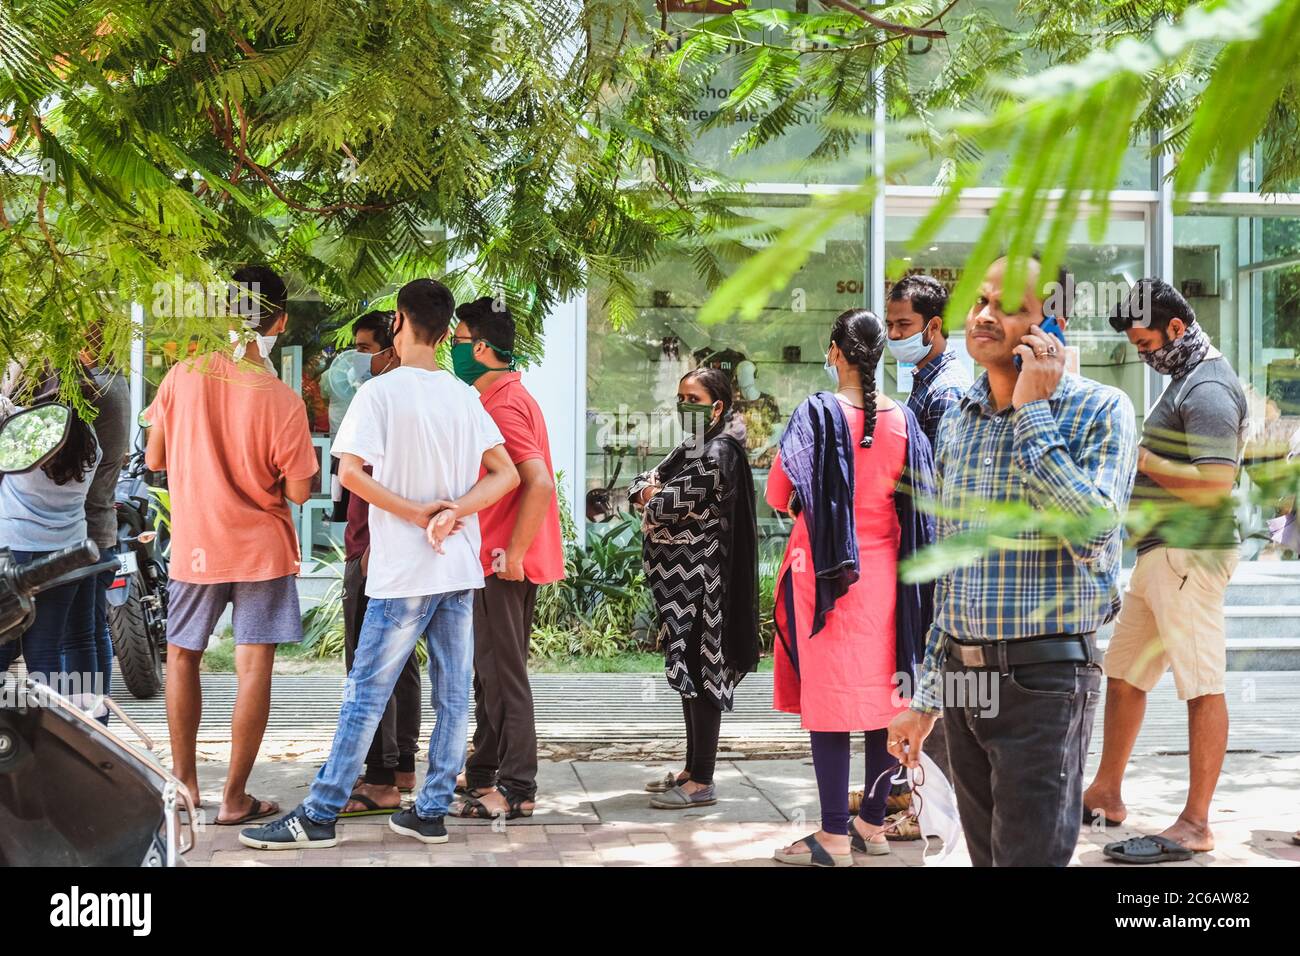 Bangalore, India - May 31, 2020. Citizens stand in line to shop during a pandemic. Bangalore India Stock Photo